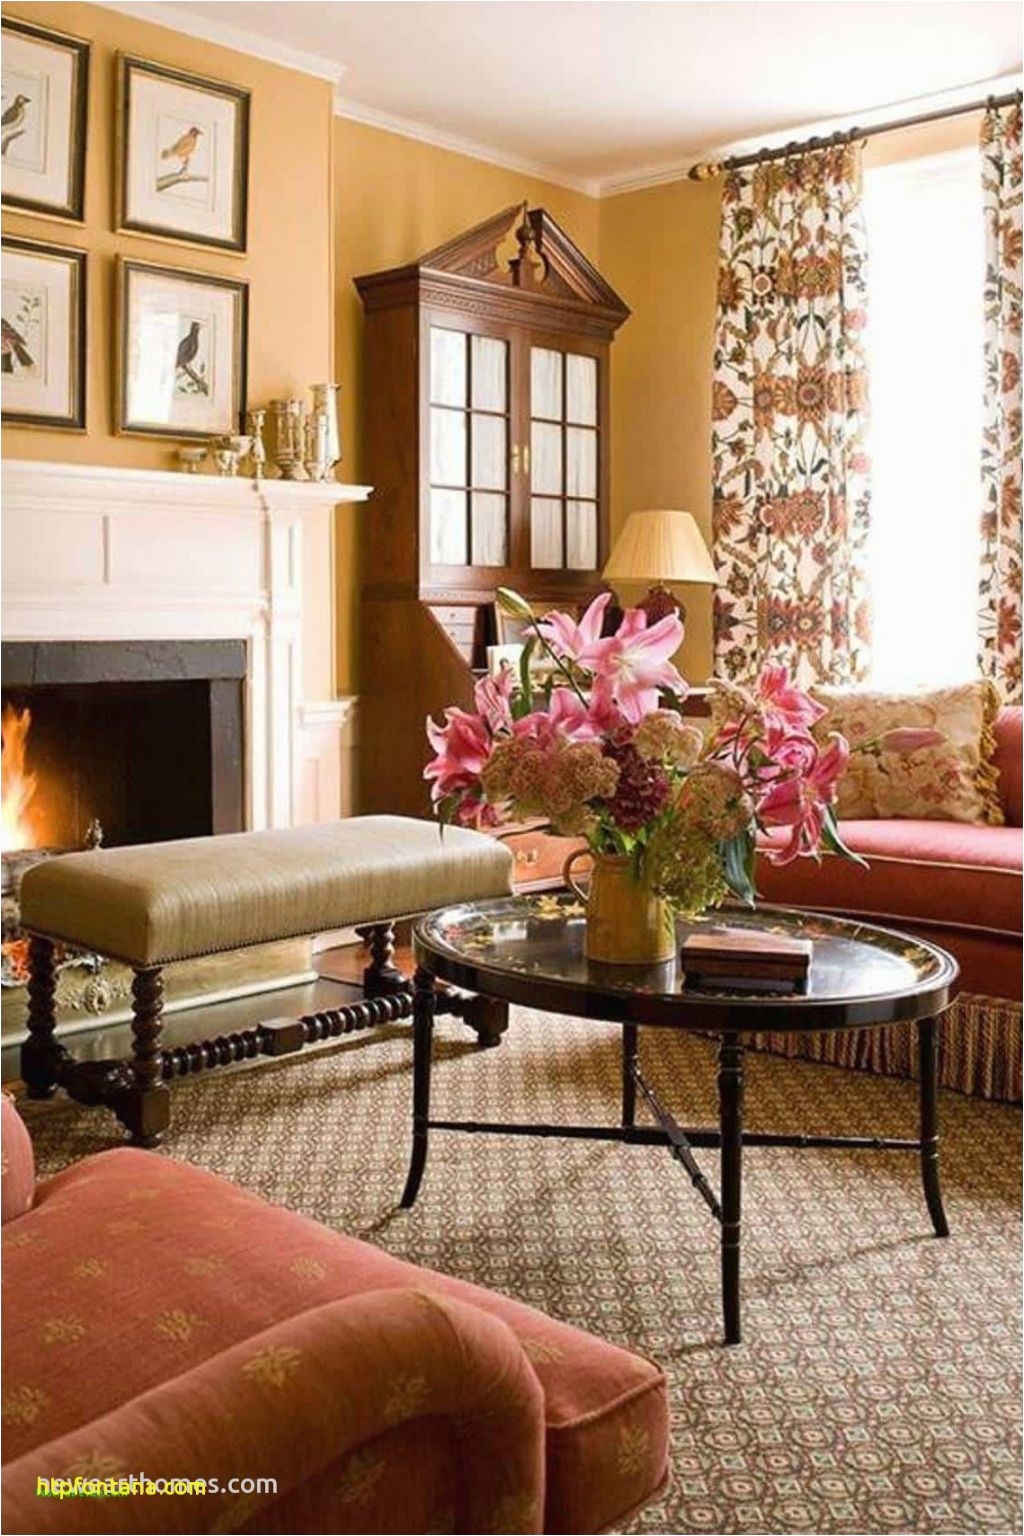 24 wonderful pink accent chairs living room modern home decor ideas alluring media cache ec0 pinimg 736x cd 0d